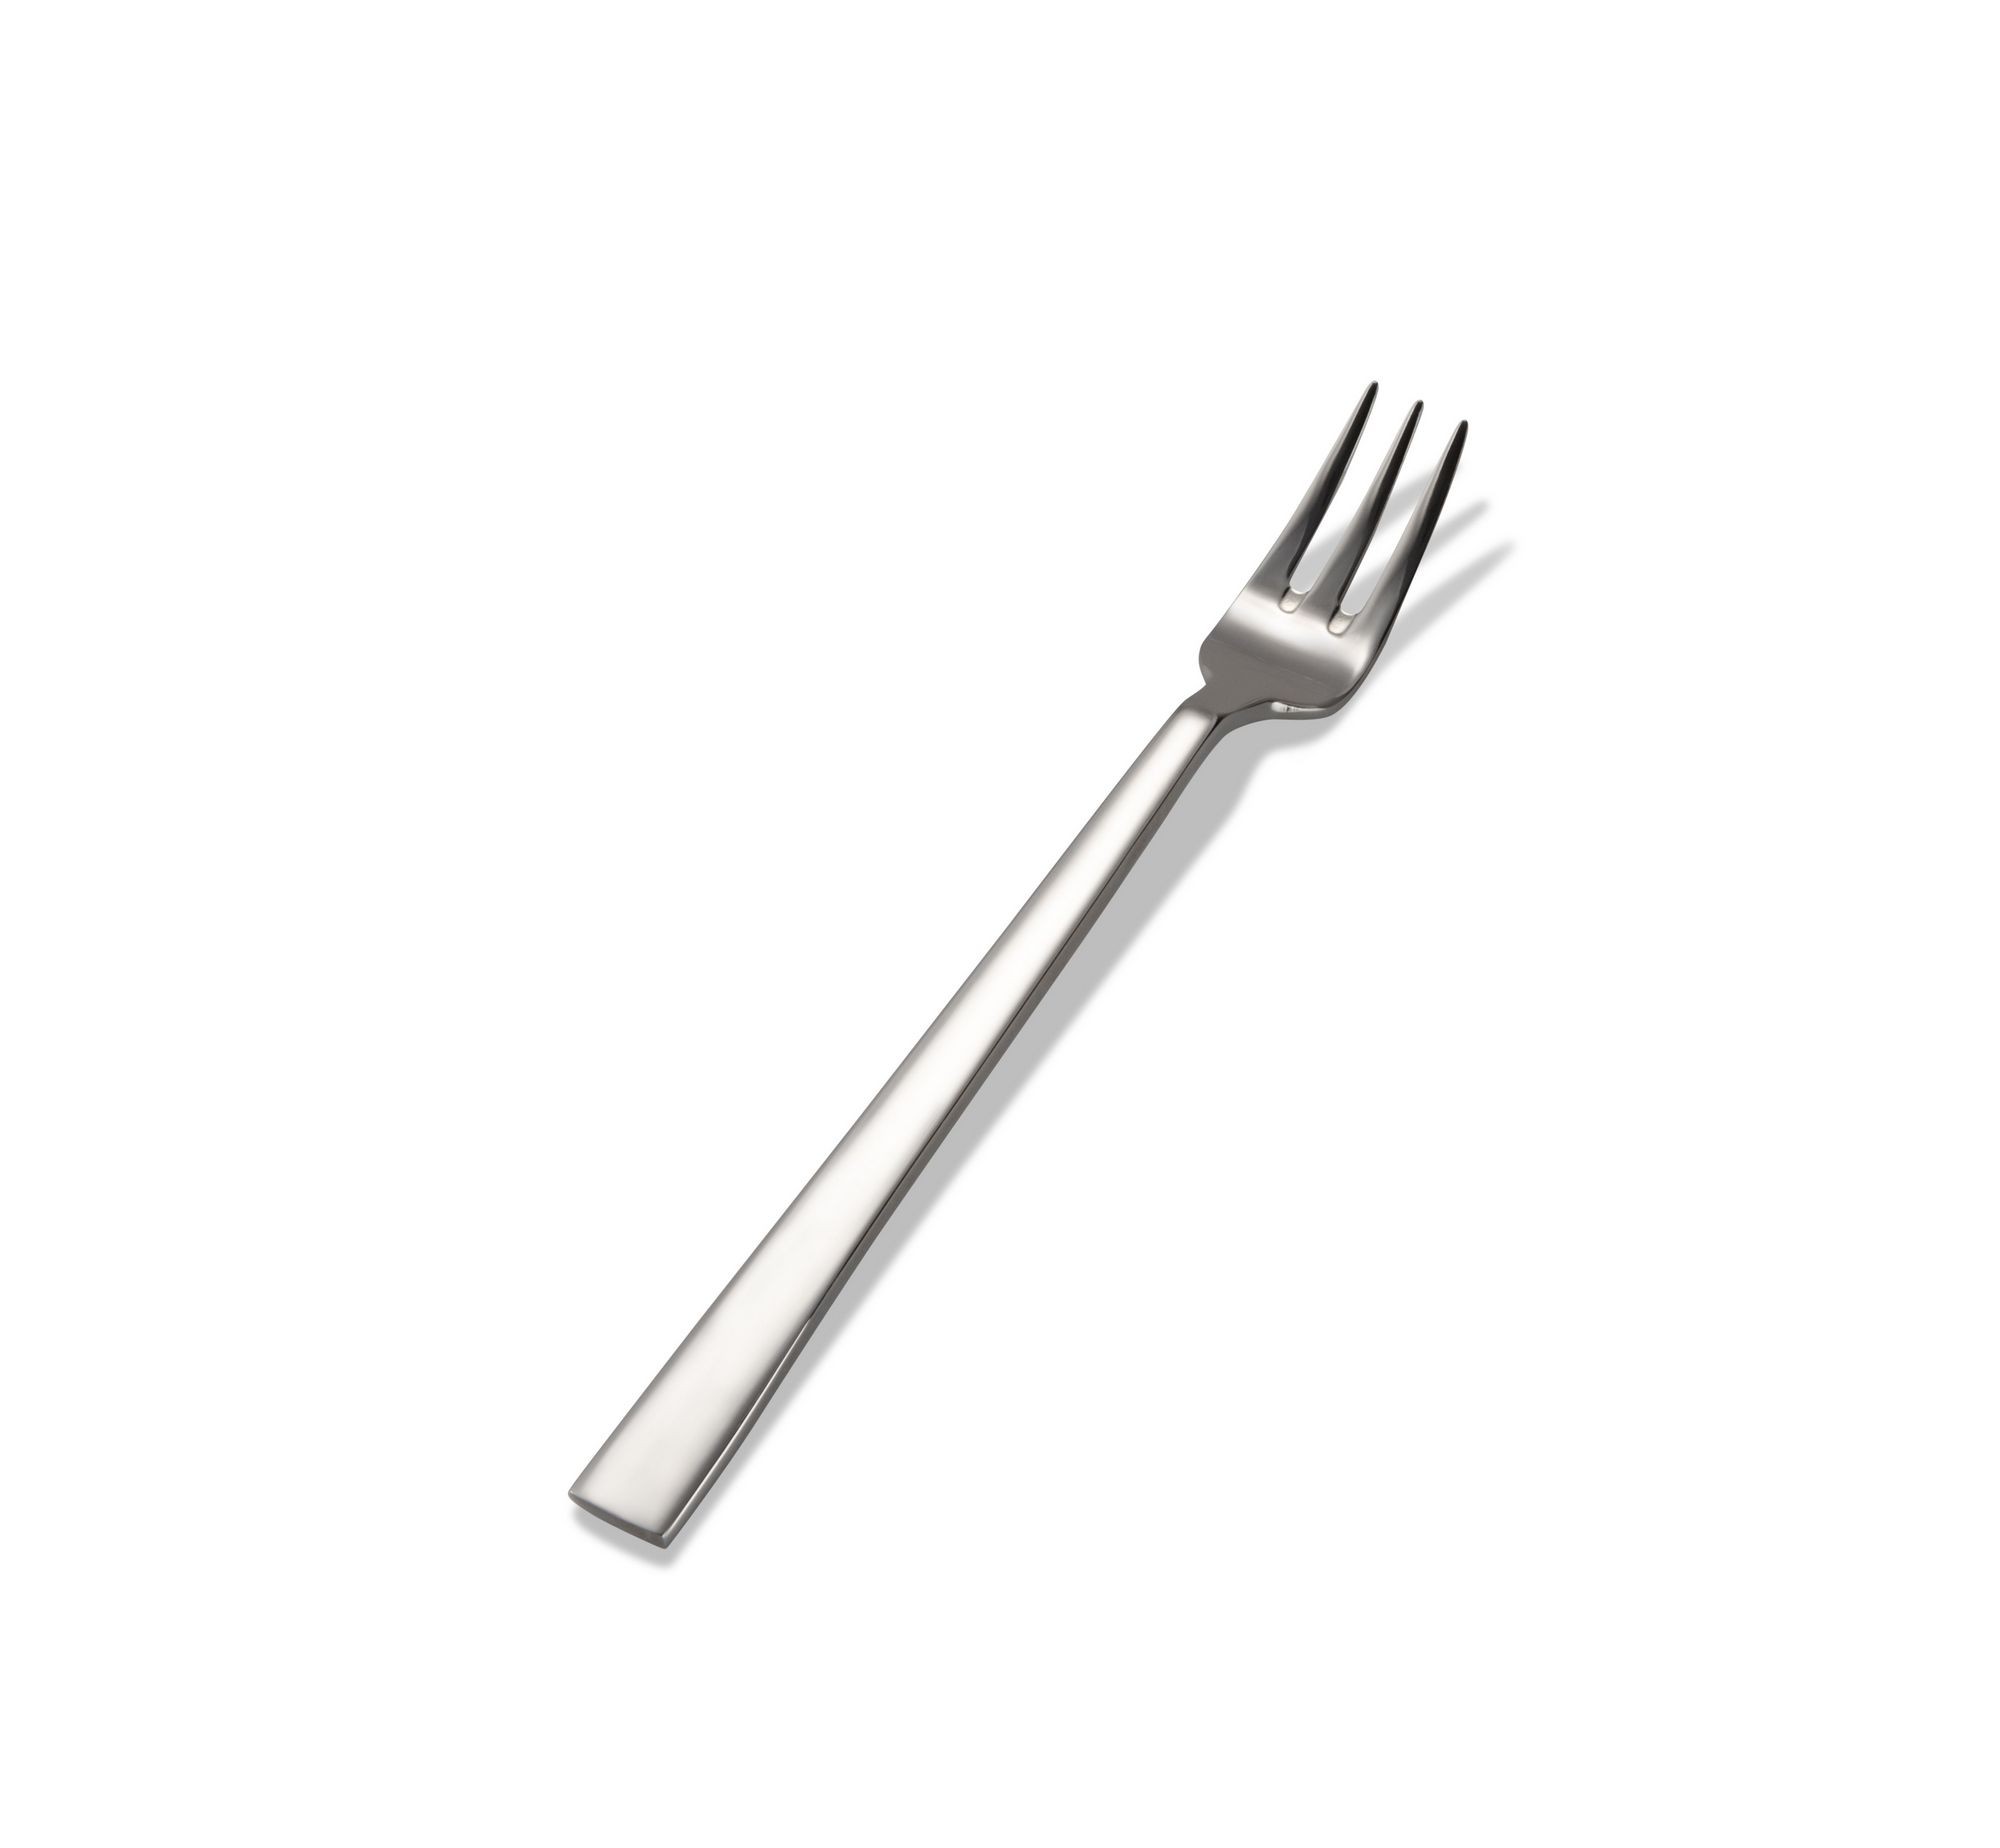 Bon Chef S3708 Roman 18/8 Stainless Steel Oyster Fork